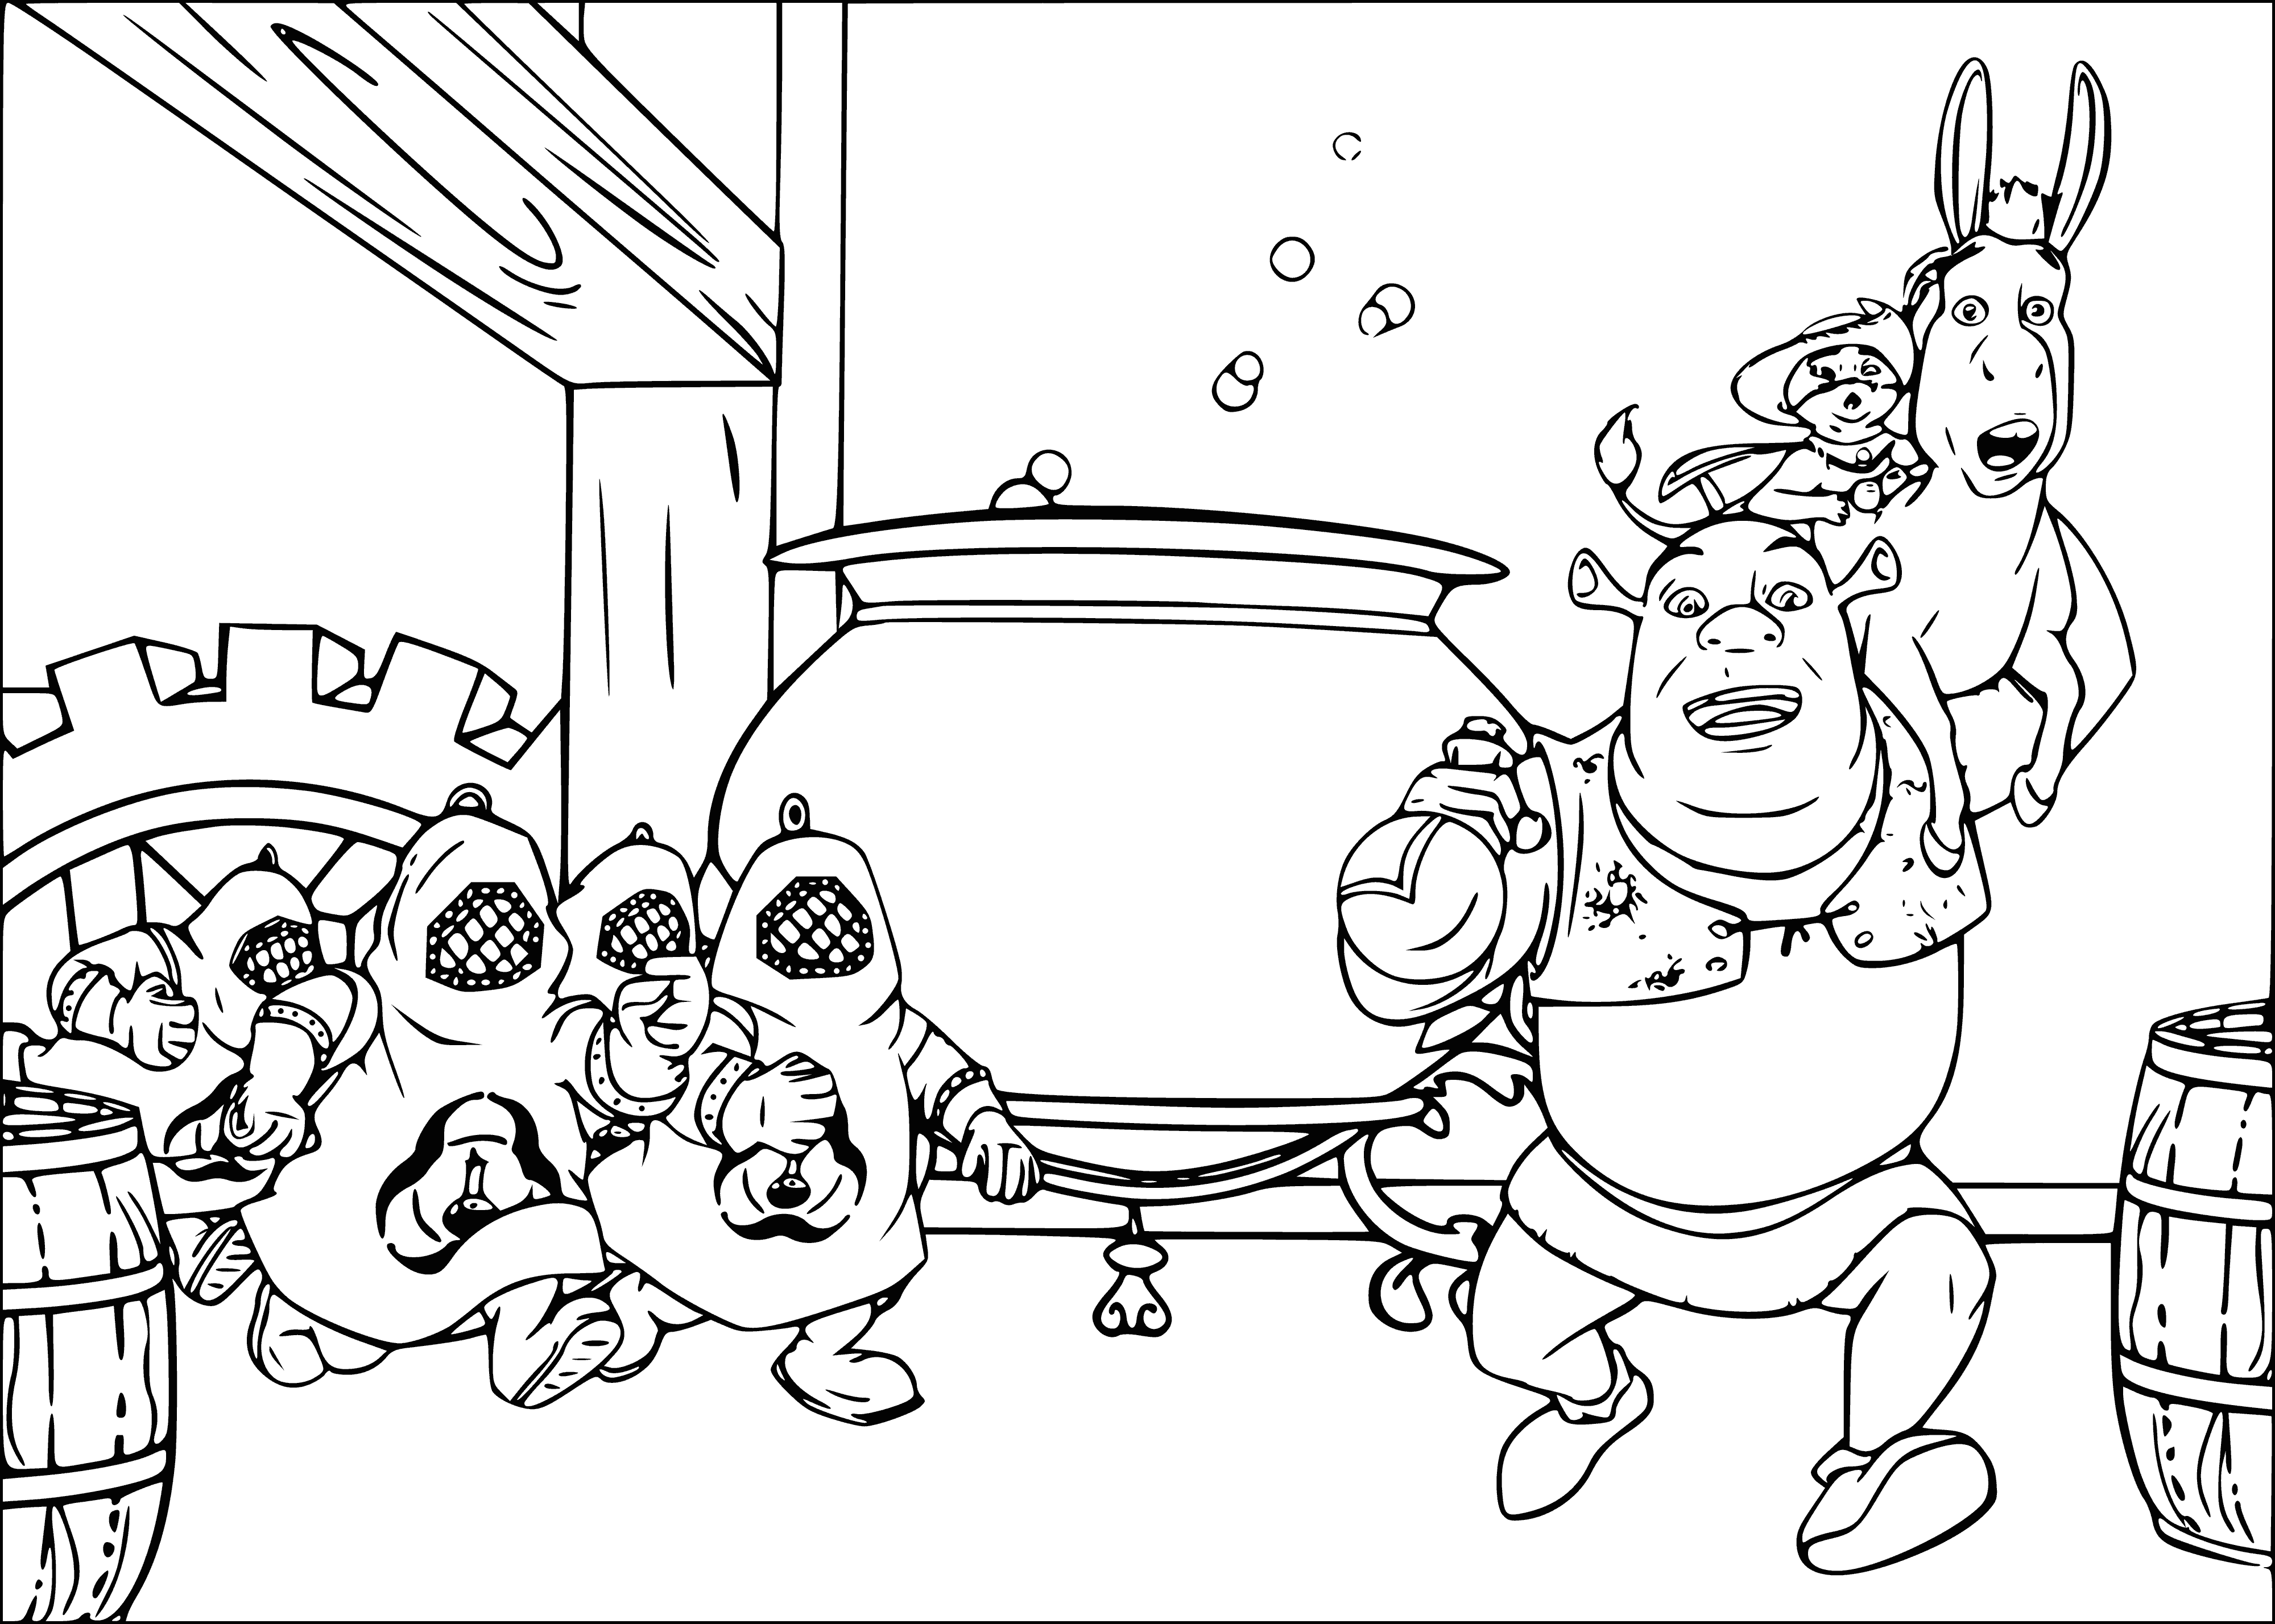 coloring page: Shrek escapes a factory by climbing on boxes to find the exit.